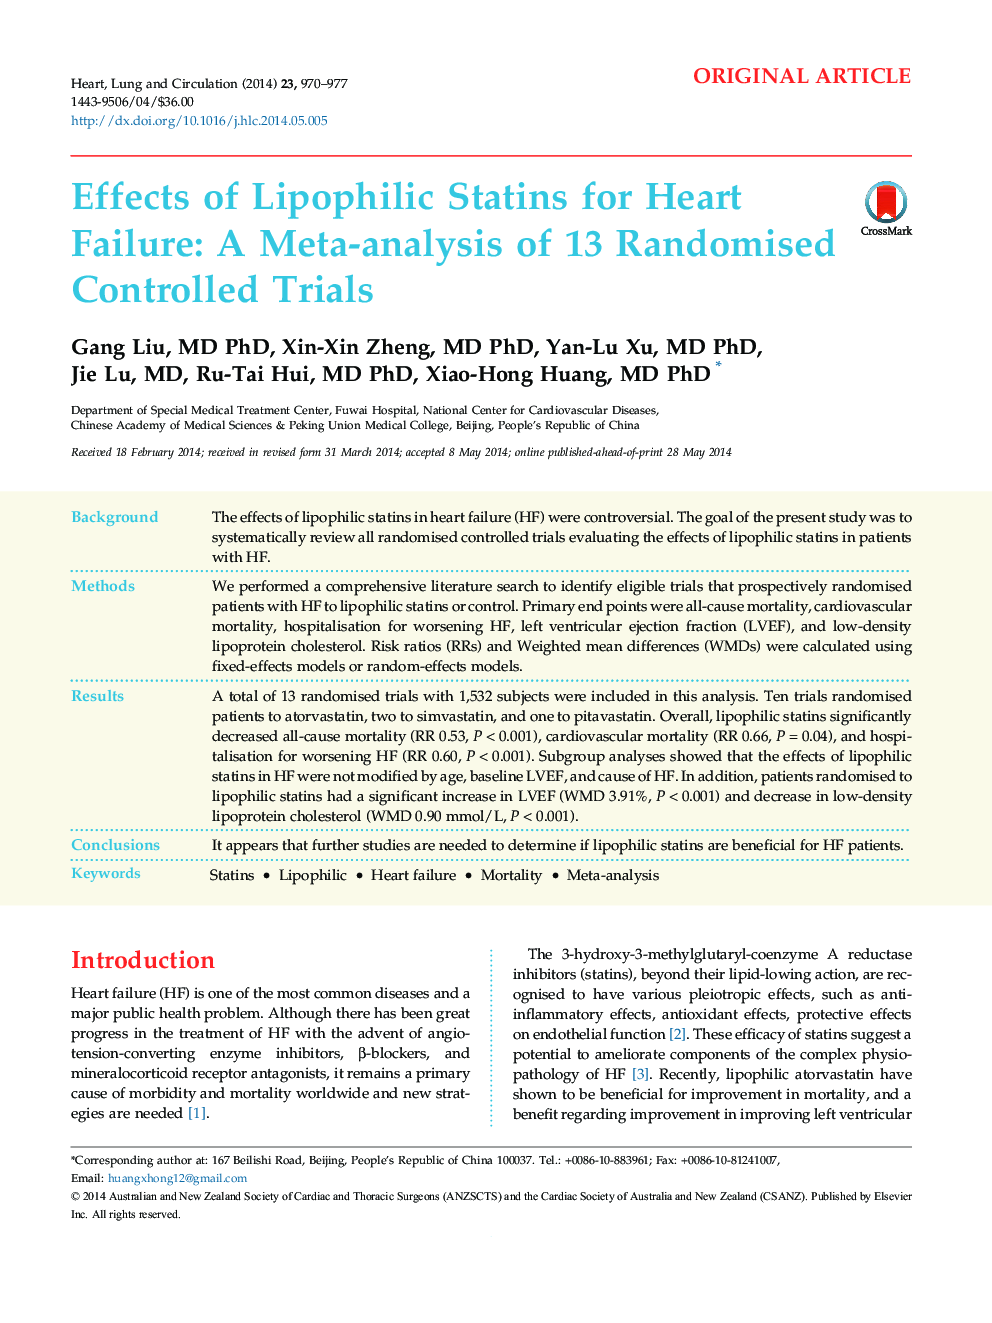 Effects of Lipophilic Statins for Heart Failure: A Meta-analysis of 13 Randomised Controlled Trials